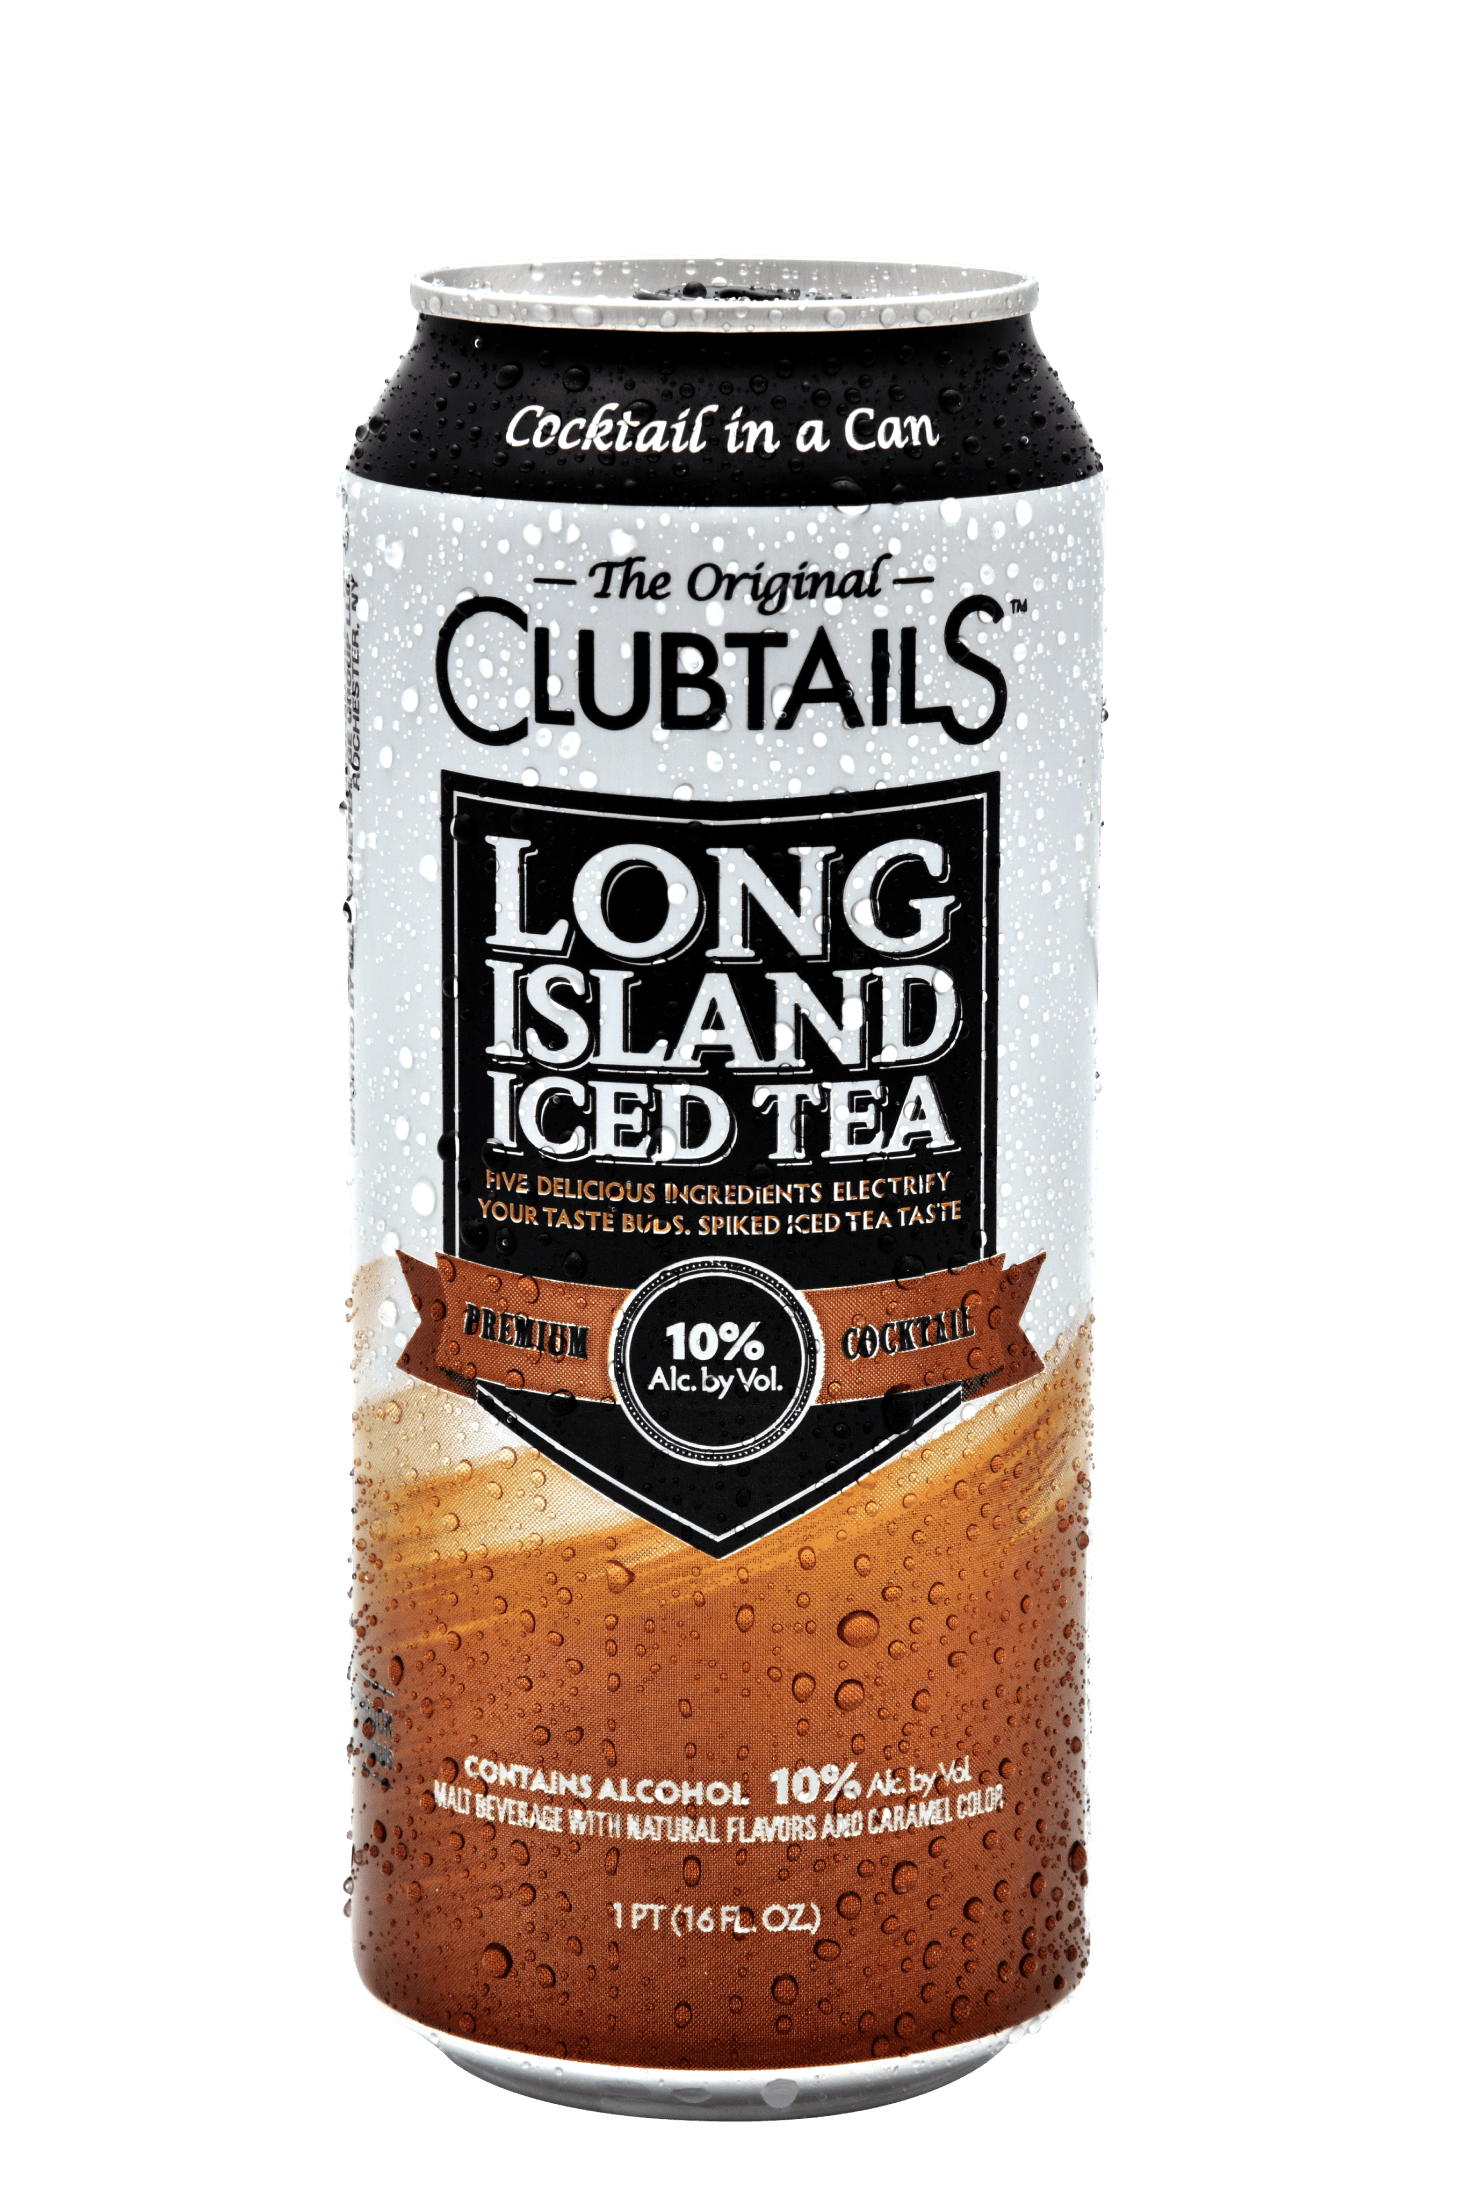 Long Island| Clubtails Cocktail in a Can